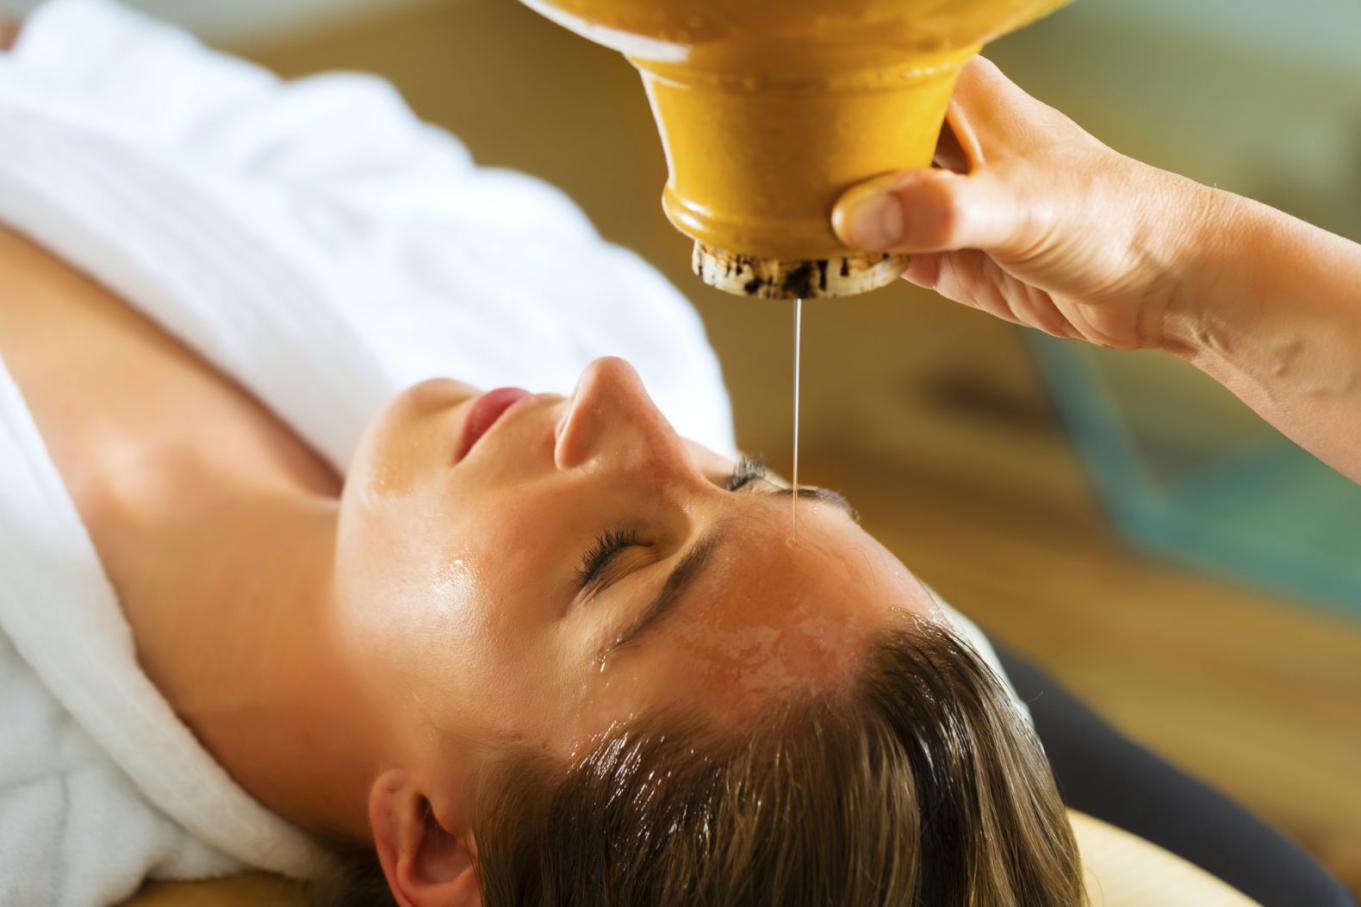 How Can I Make The Most Of My Experience At An Ayurvedic Retreat?